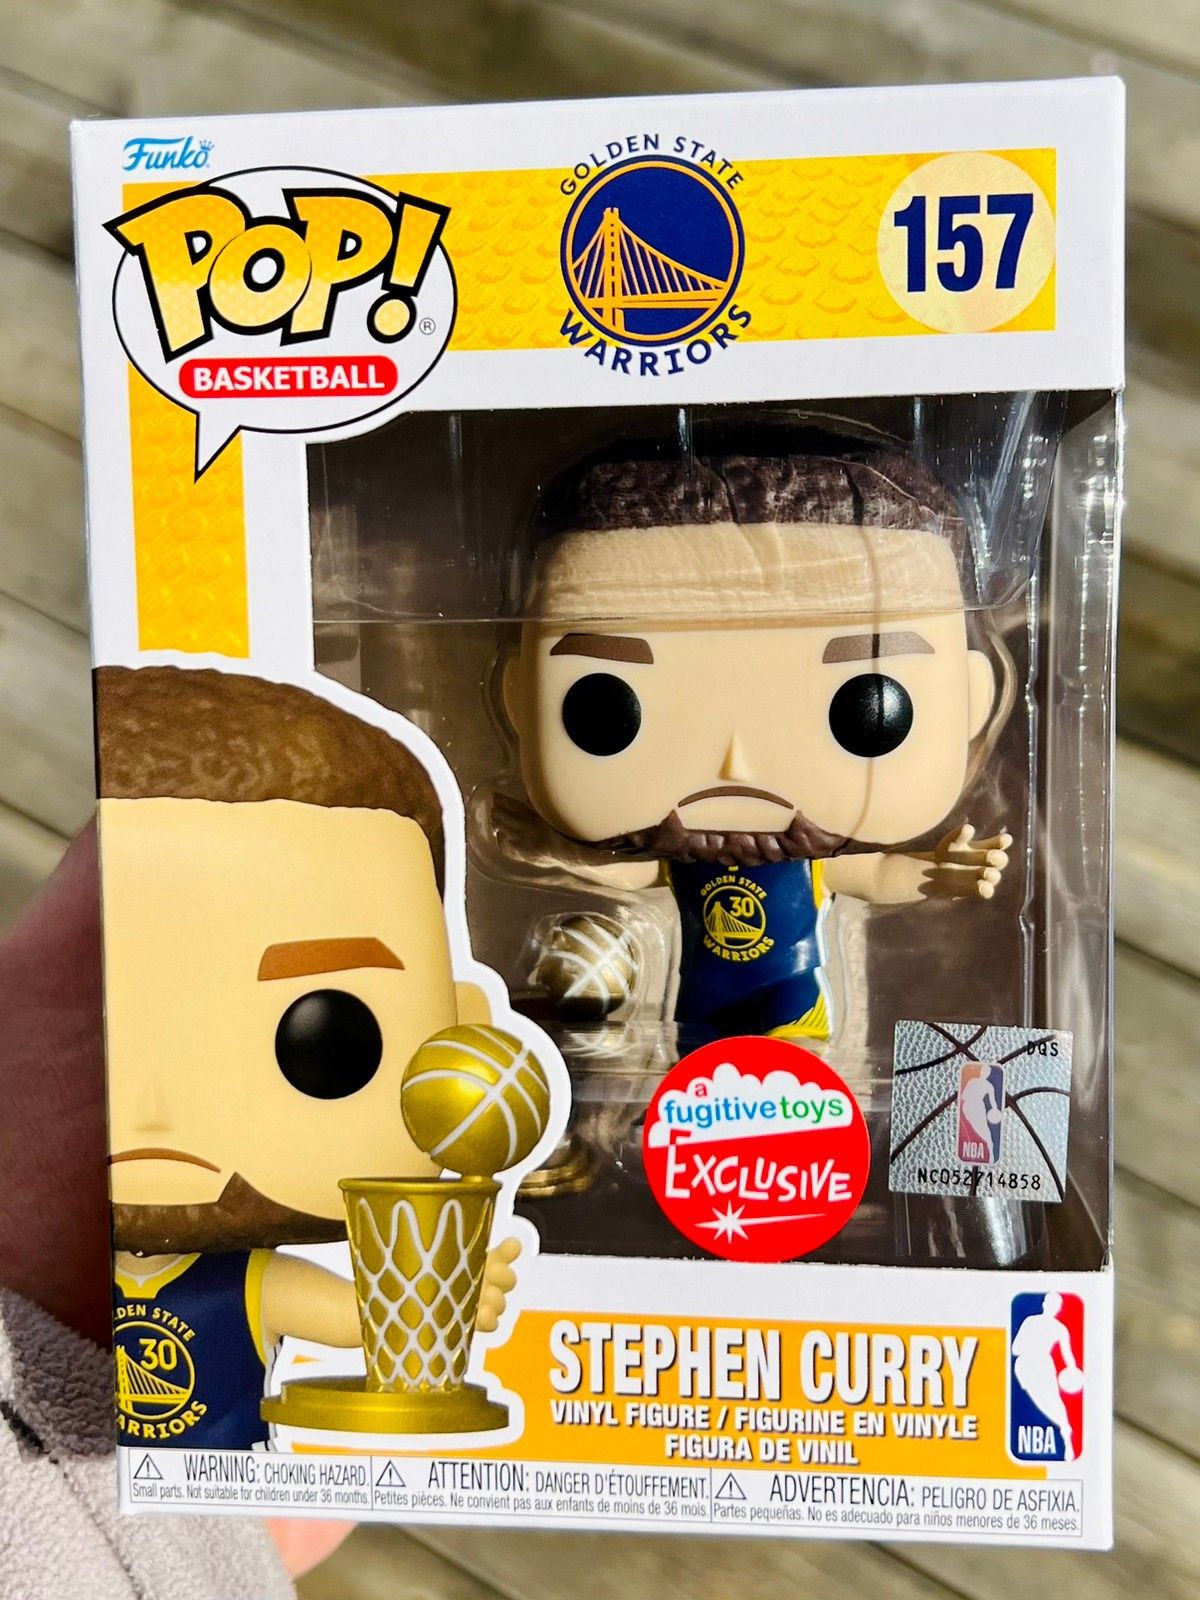 Buy Pop! Stephen Curry with Trophy at Funko.